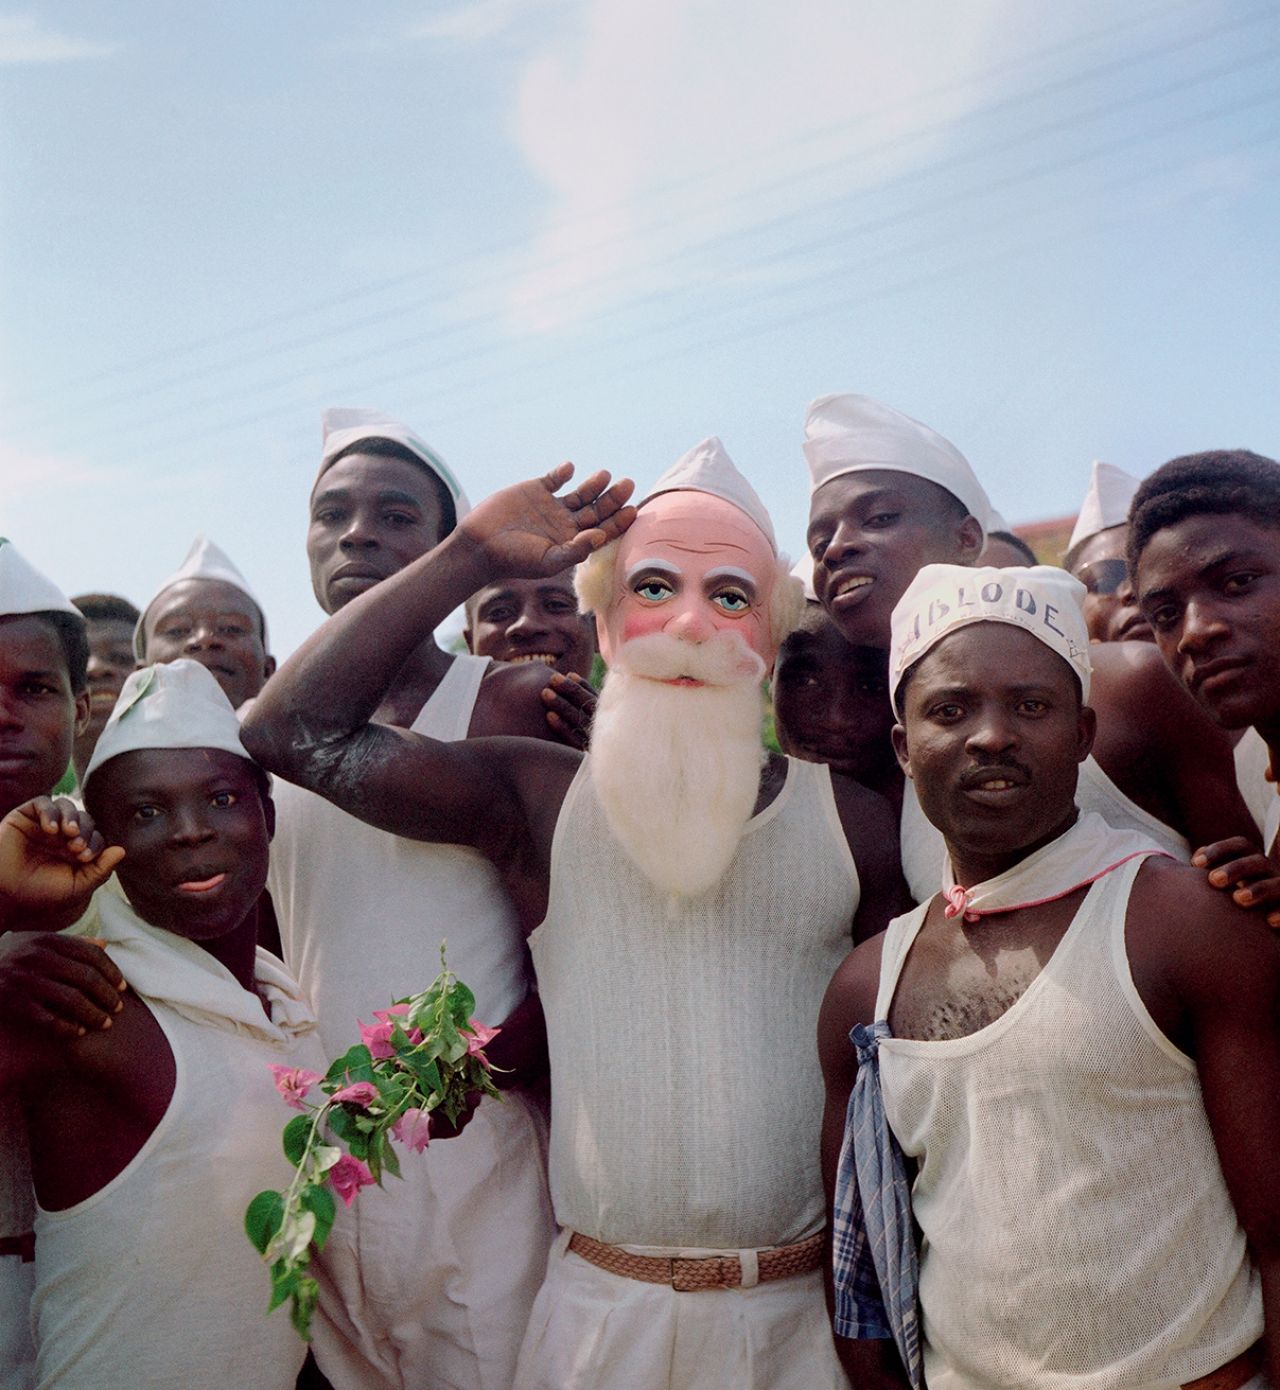 Togoland (Togo), 1958 – Group of men with white hats, one with the slogan “Ablode” (freedom), and another with a Santa Claus mask on election day, April 27 © 2021 Todd Webb Archive